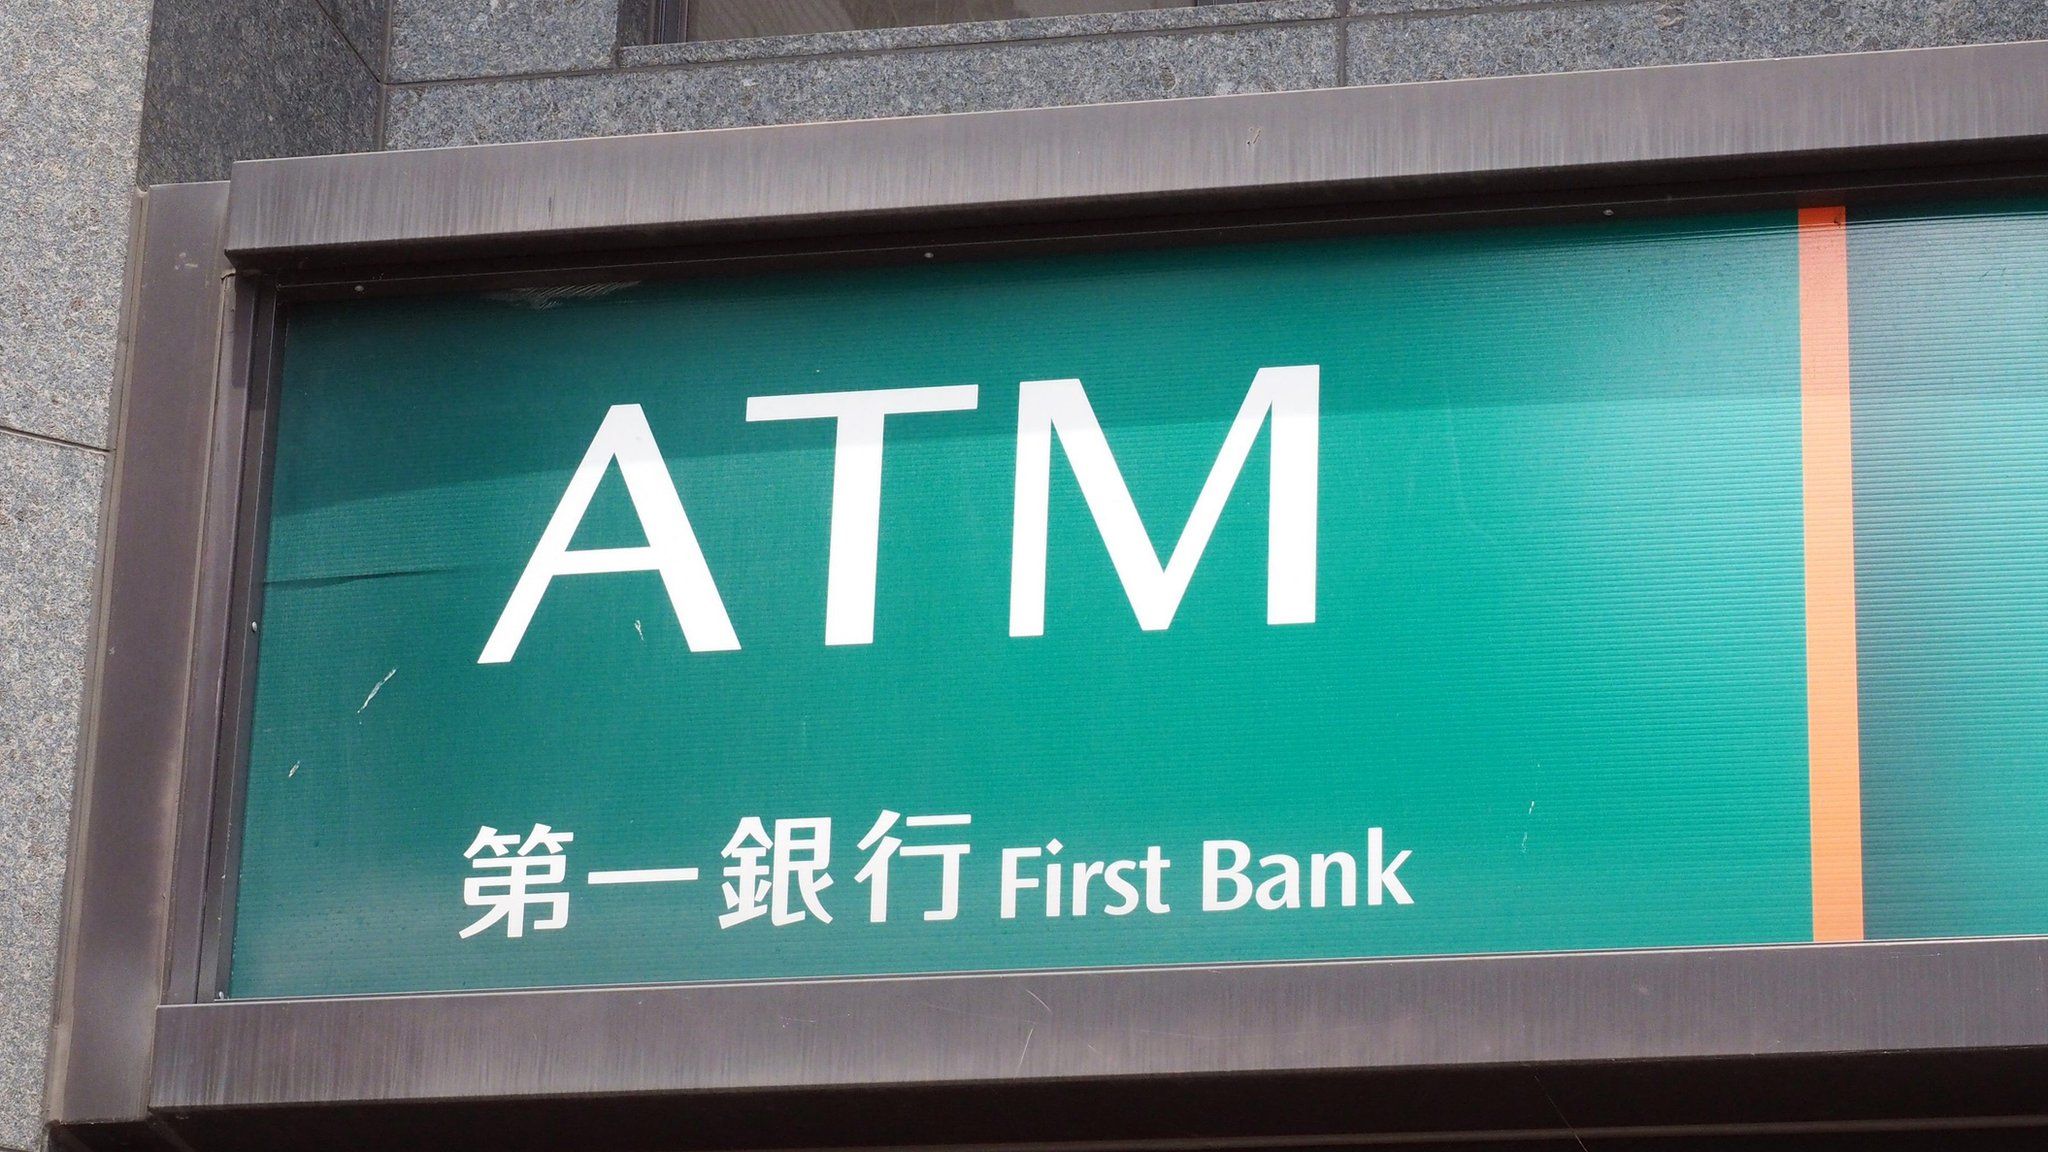 First Bank ATM sign